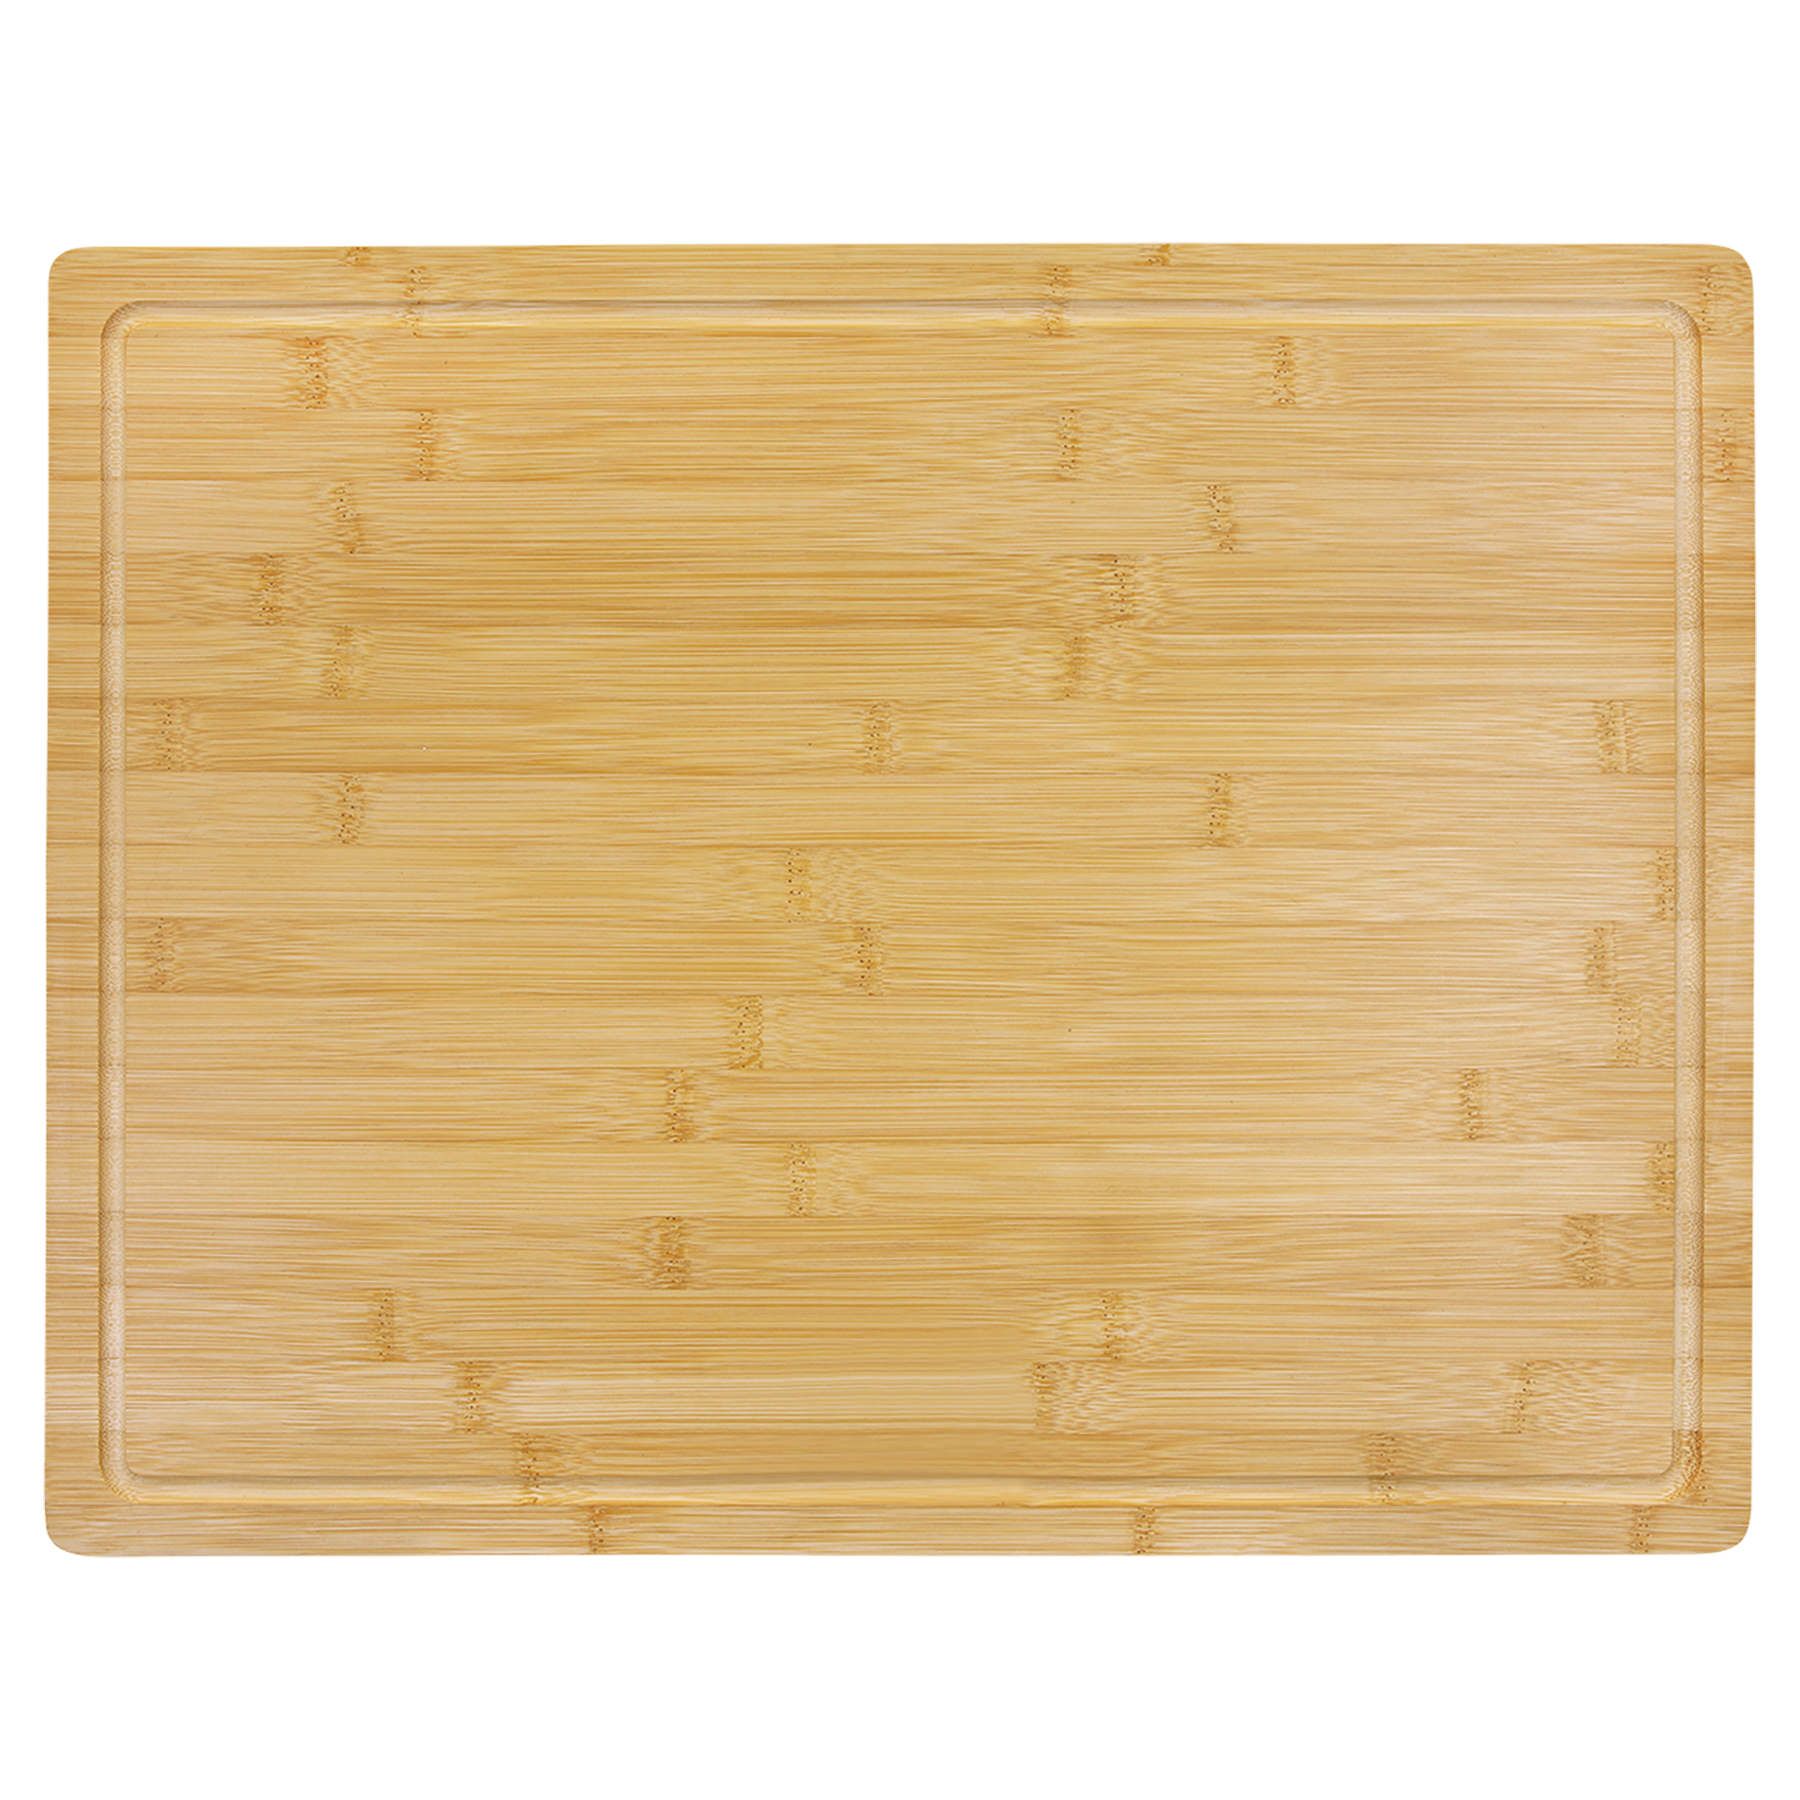 SUNFLOWER BAMBOO CUTTING BOARD- Bloom With Grace – Made At